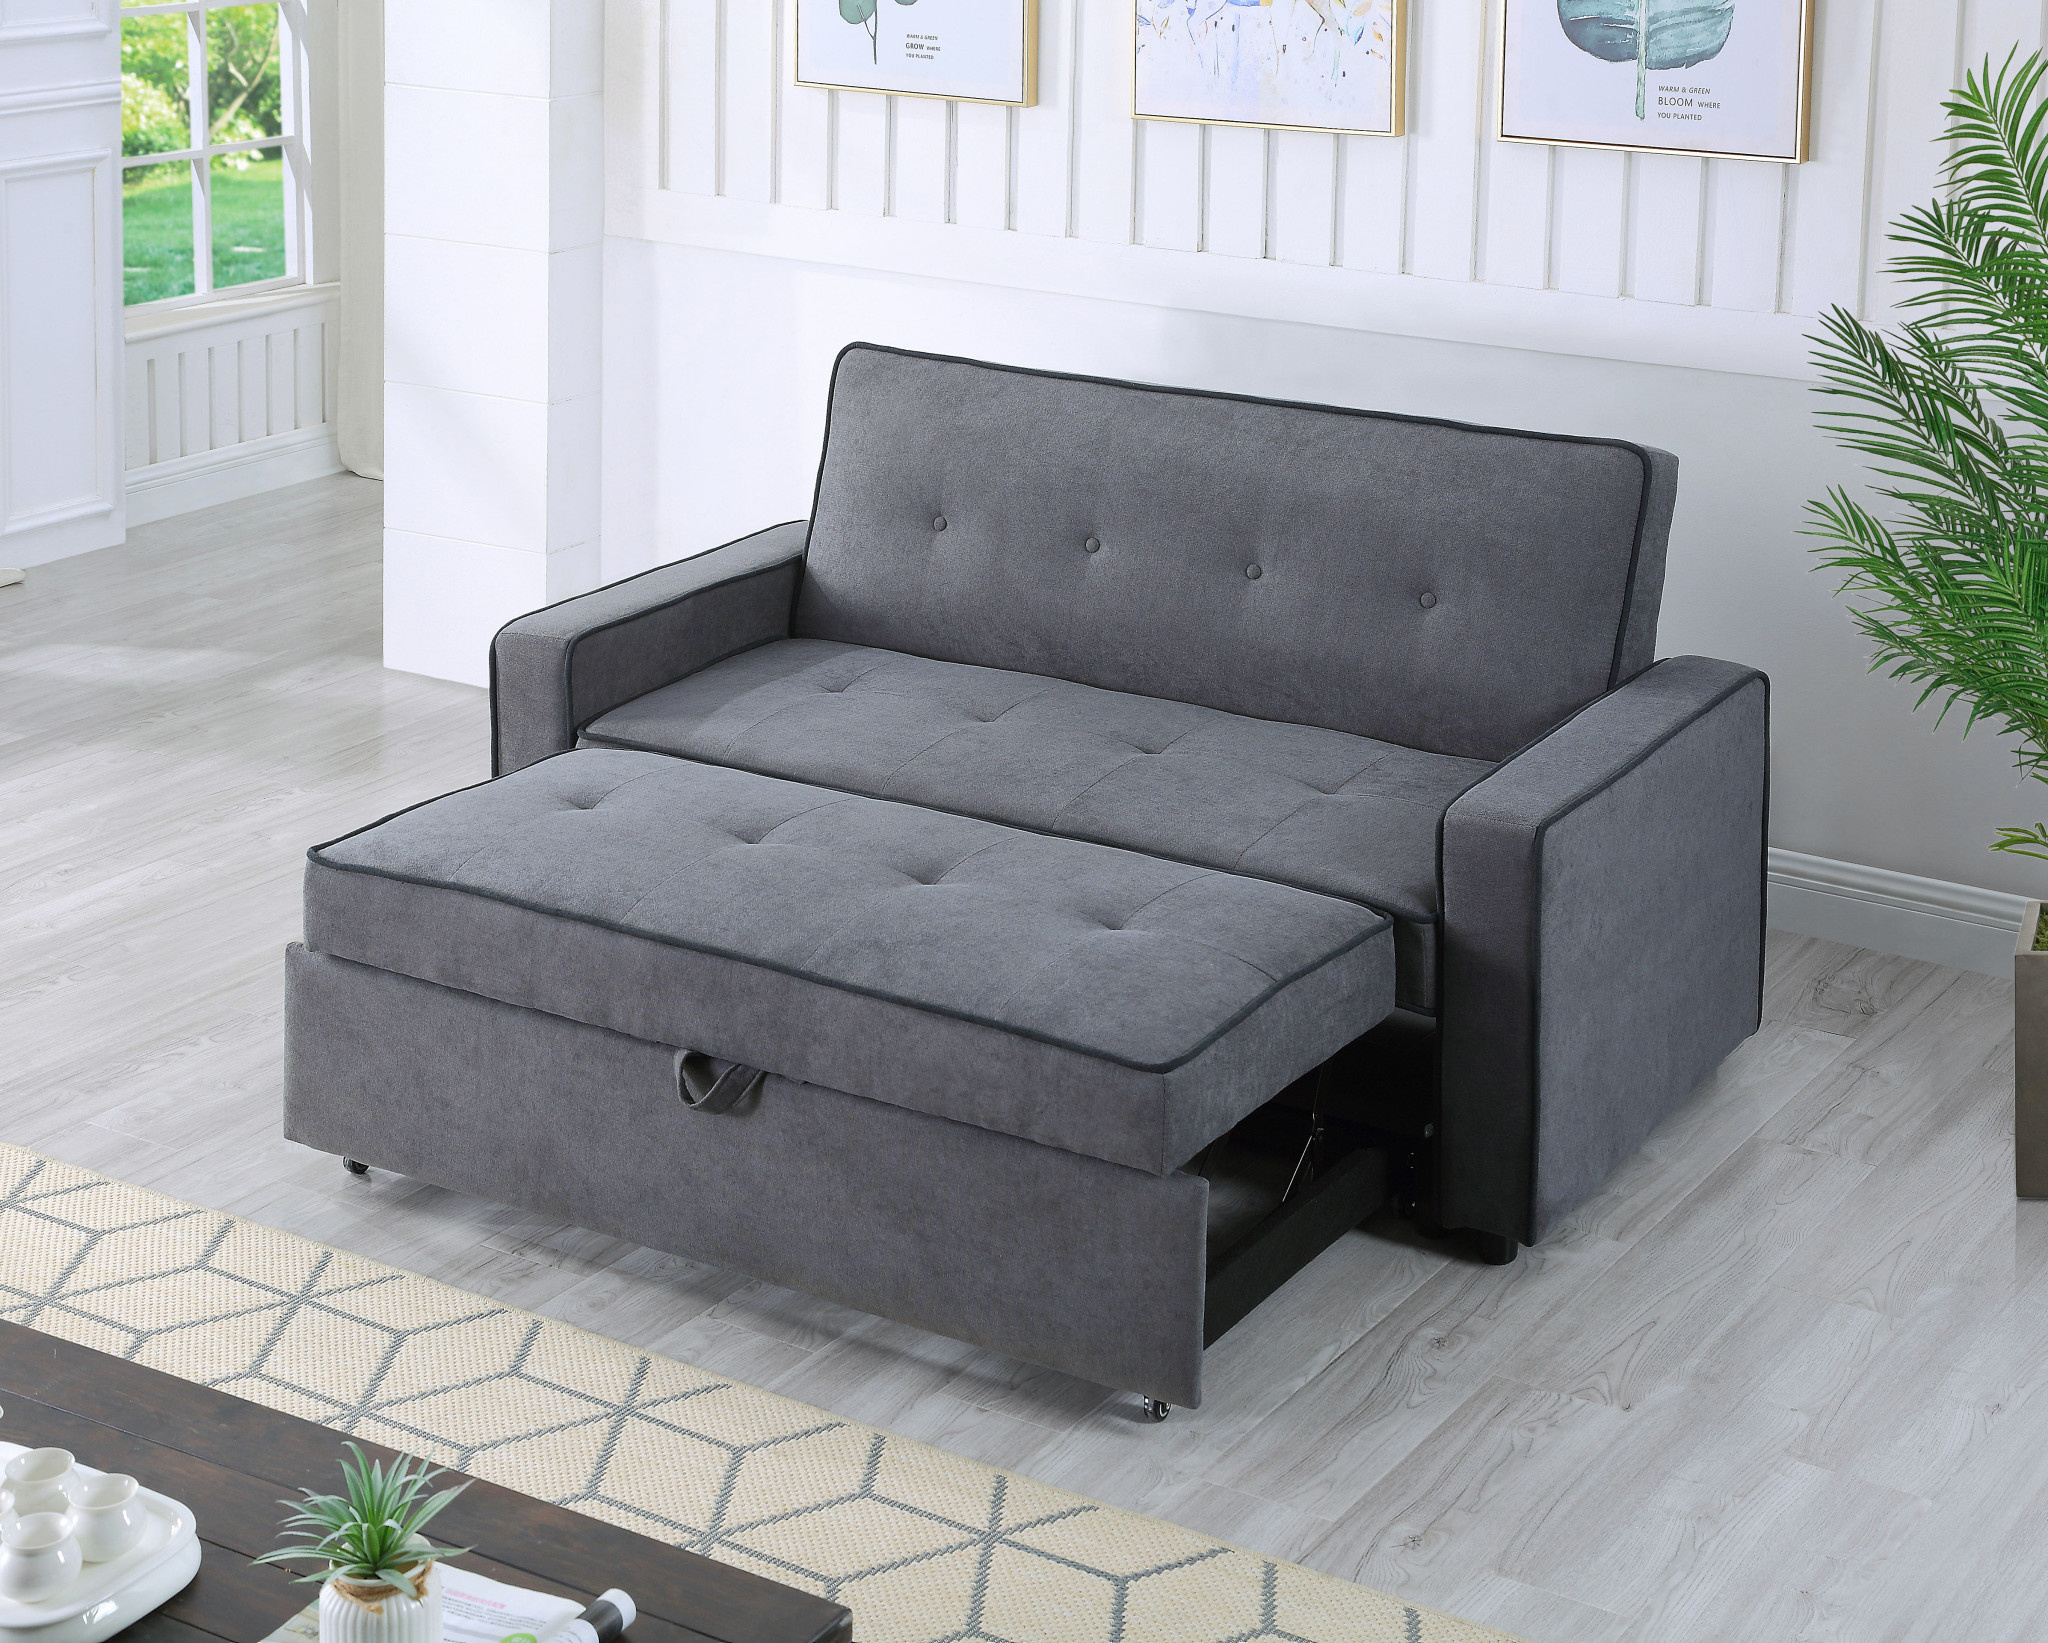 2 seater settee sofa bed